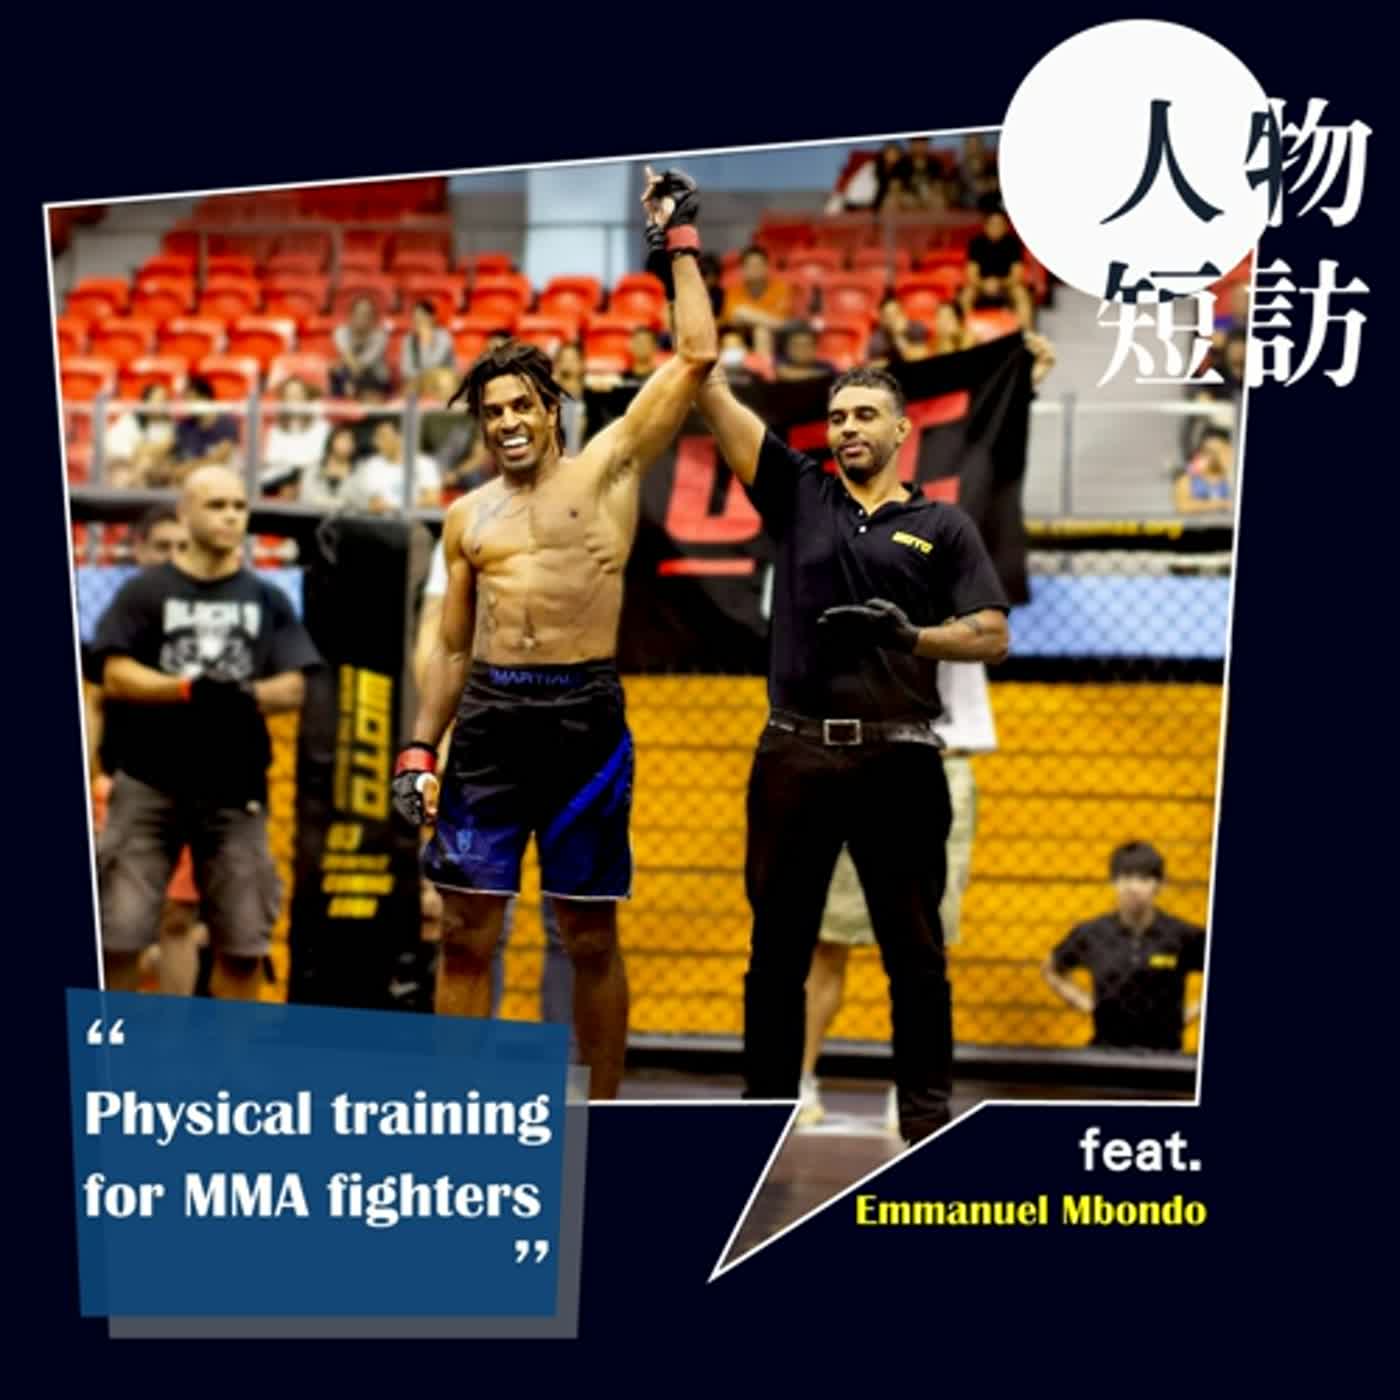 【S3E05】Physical training for MMA fighters feat. Emmanuel Mbondo